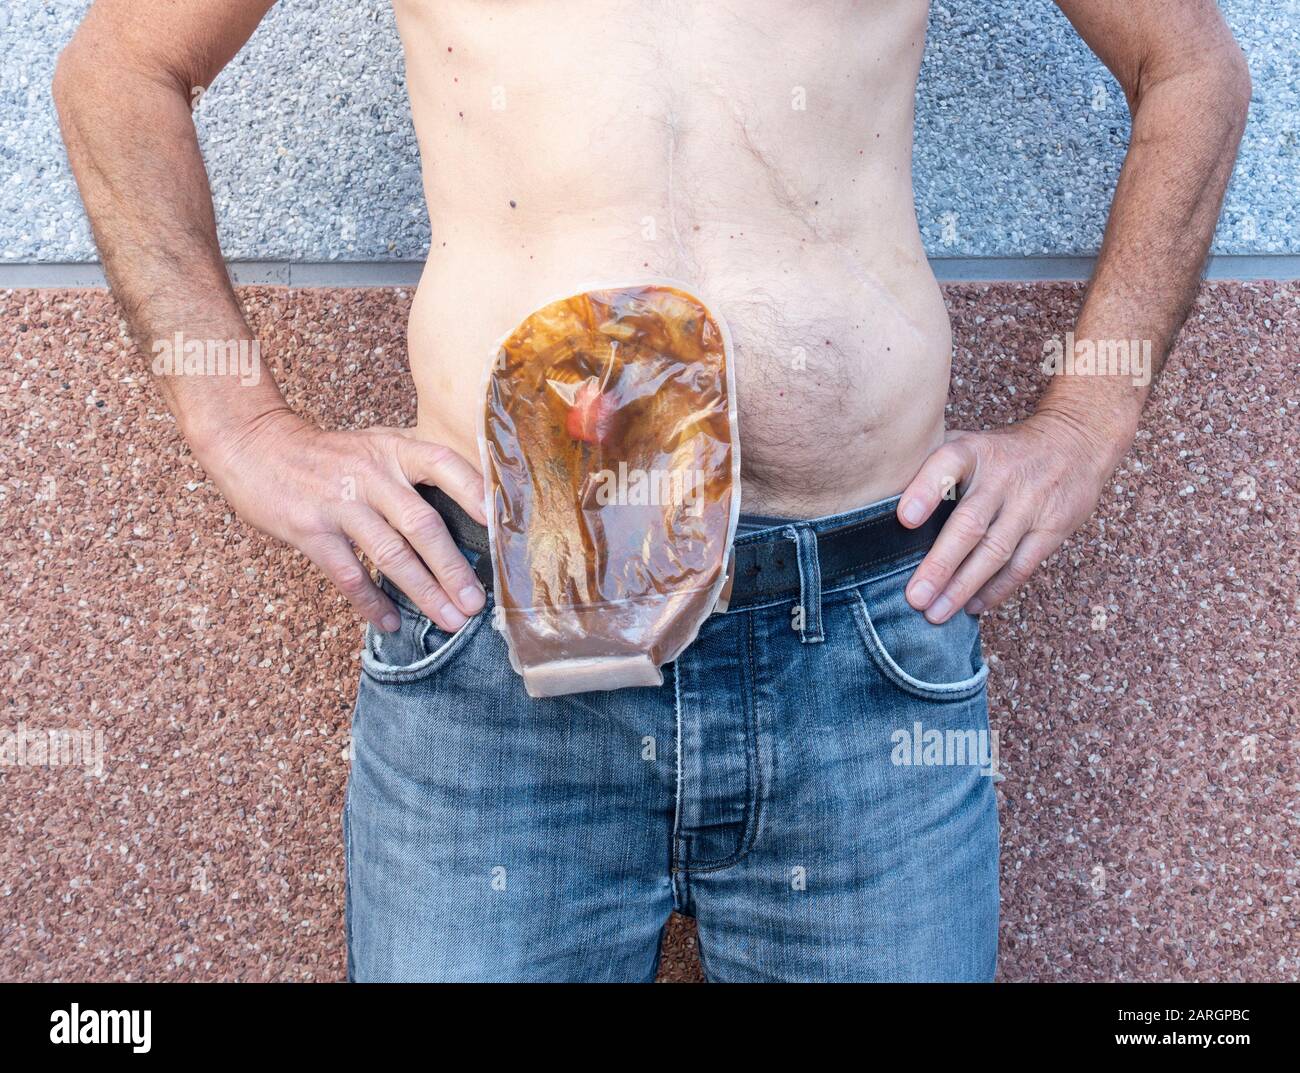 https://c8.alamy.com/comp/2ARGPBC/mature-man-with-stoma-wearing-transparent-ileostomy-bag-see-image-2argpbt-for-new-empty-bag-after-changing-2ARGPBC.jpg